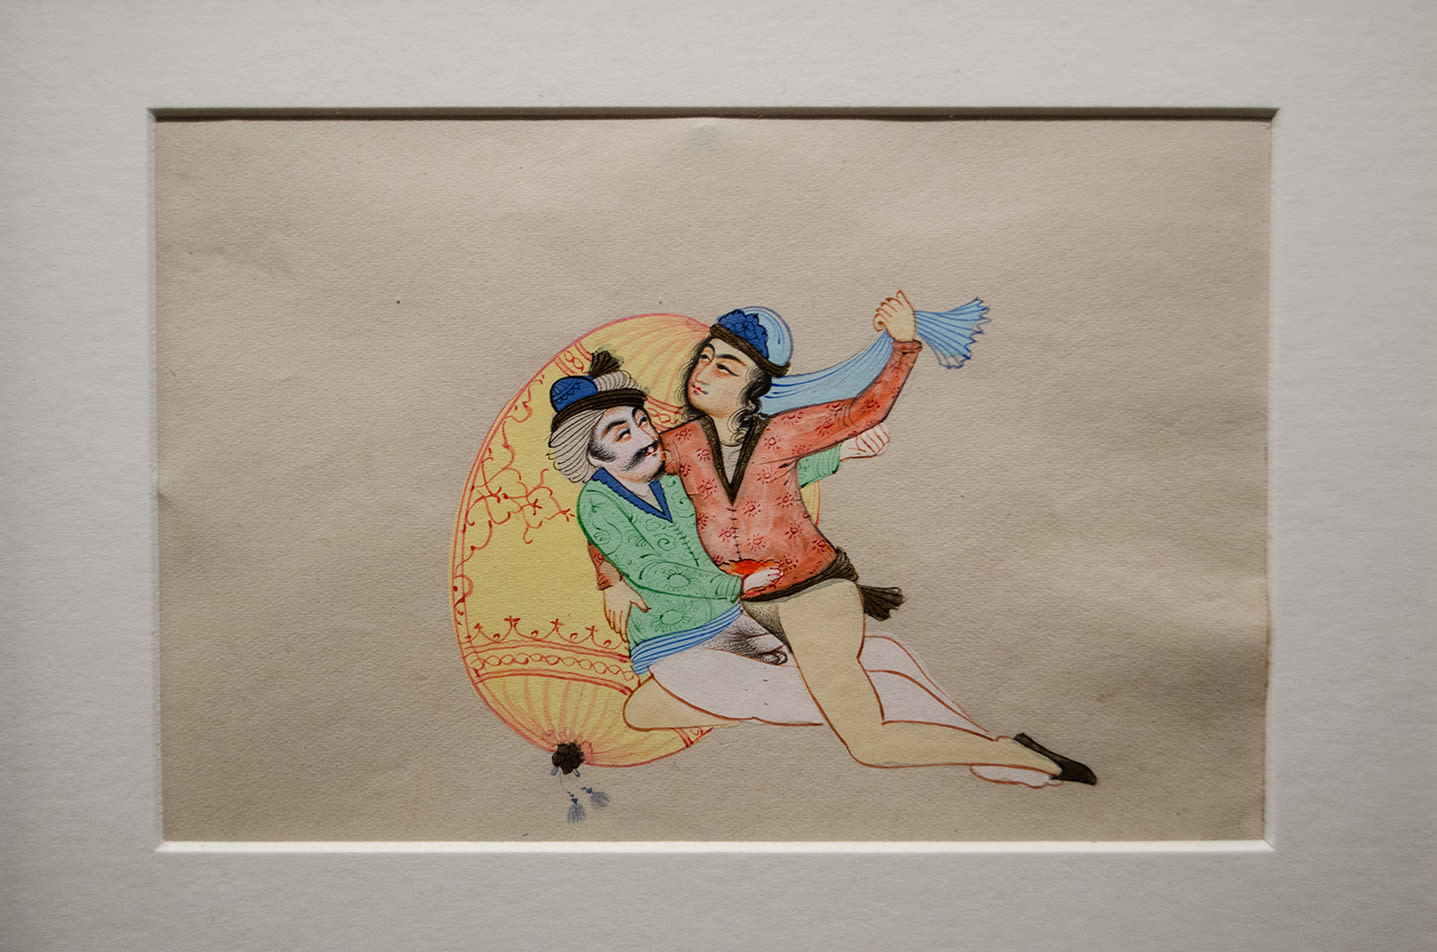 105 - Late Mughal Empire Erotic Manuscript / Painting Inspired by the Kama Sutra, 18th Century CE - 19th Century CE | Barakat Gallery